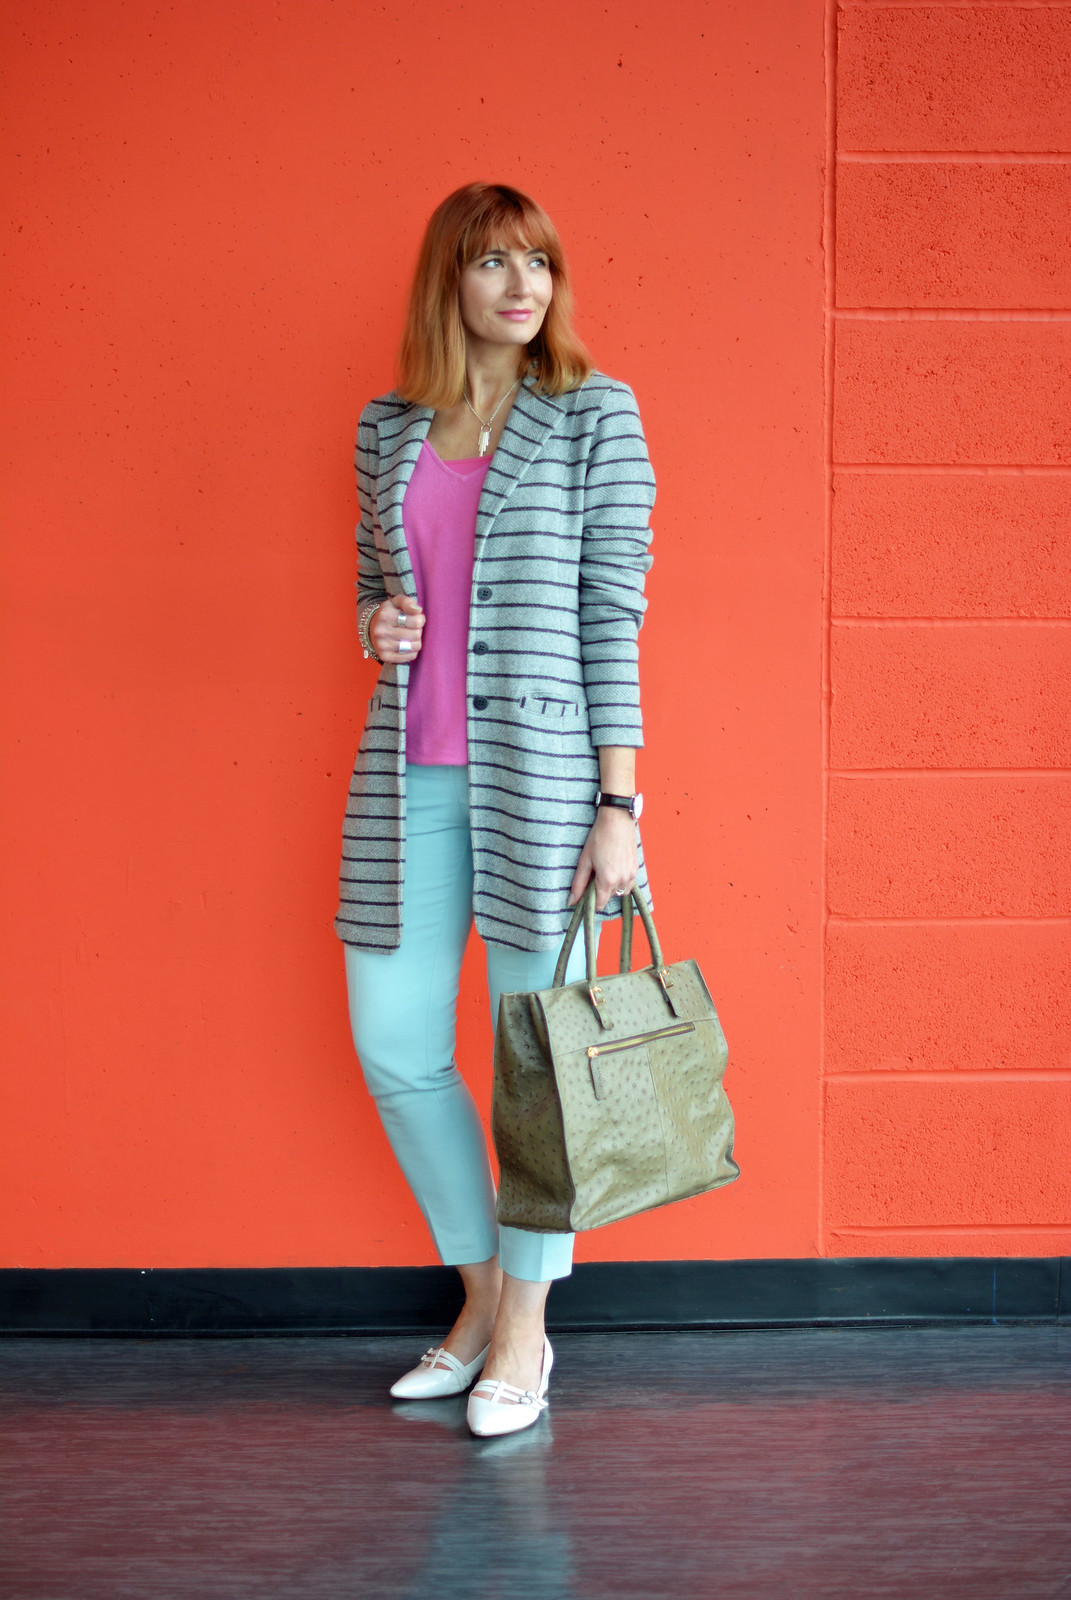 Spring Style: Pink, mint, white and grey stripes | Not Dressed As Lamb